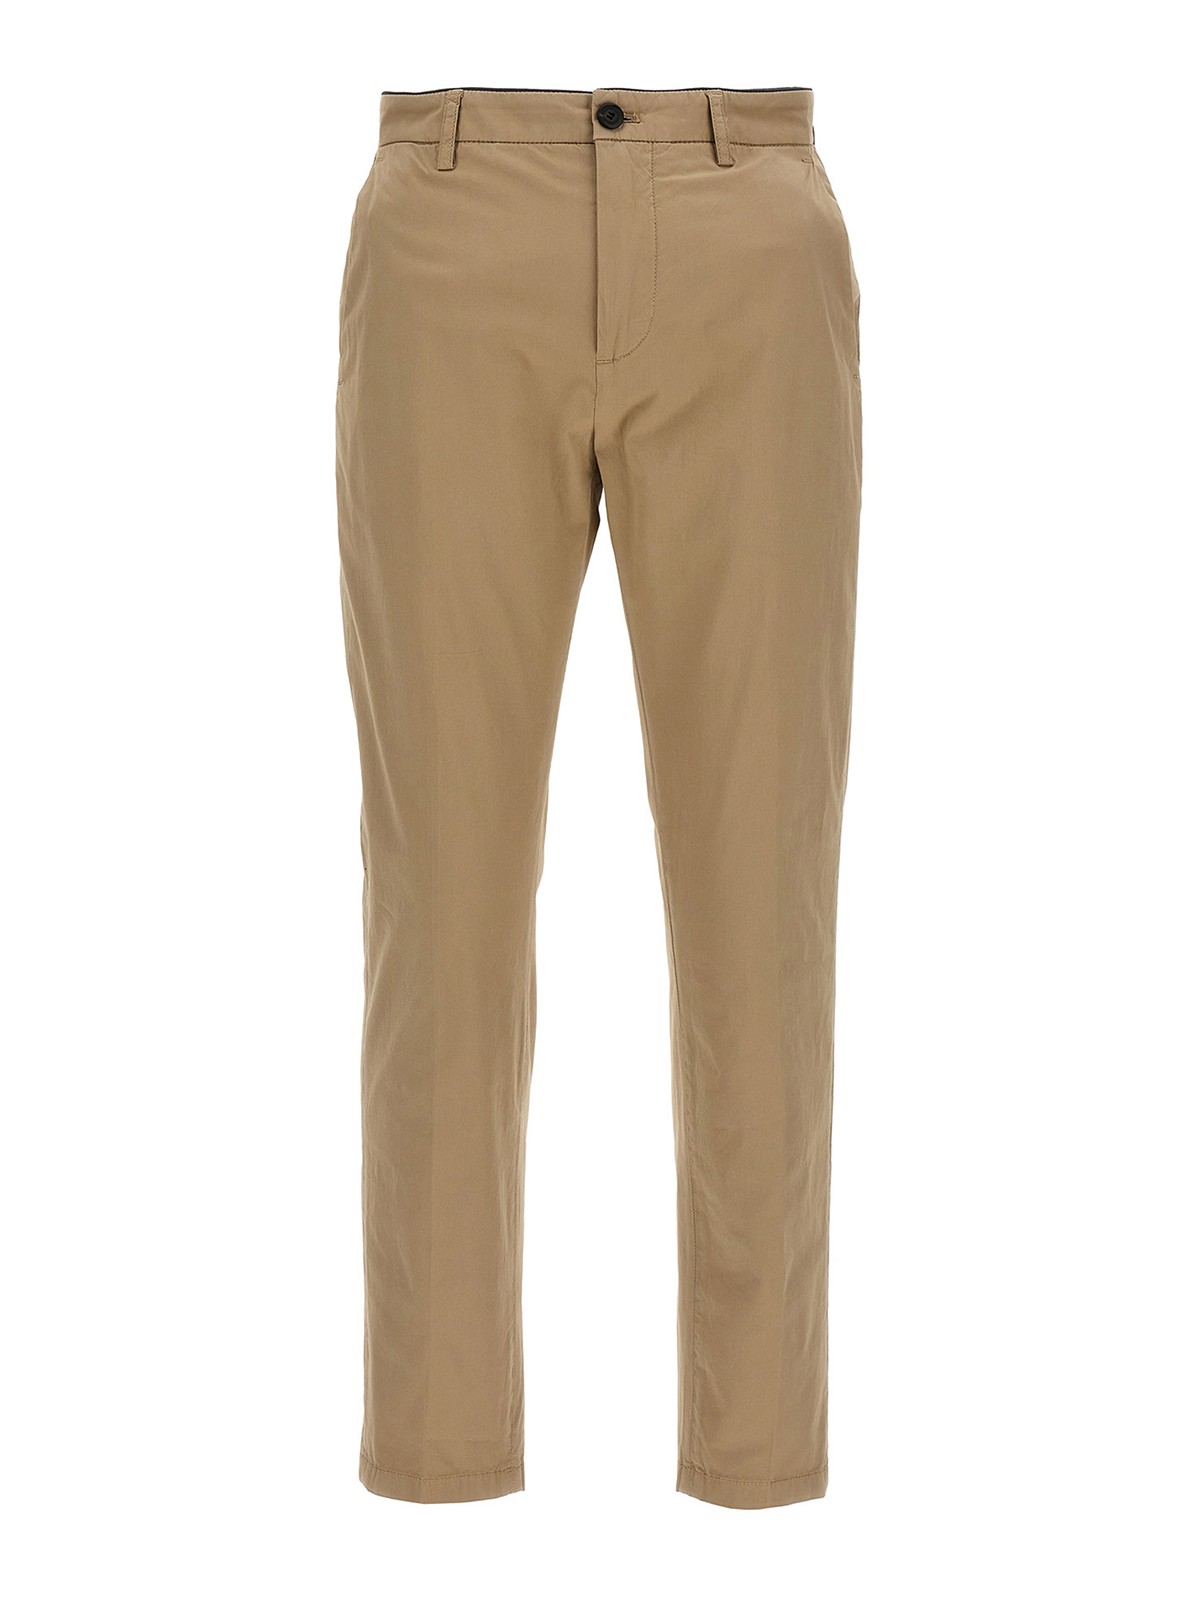 Department 5 Prince Trousers In Beige